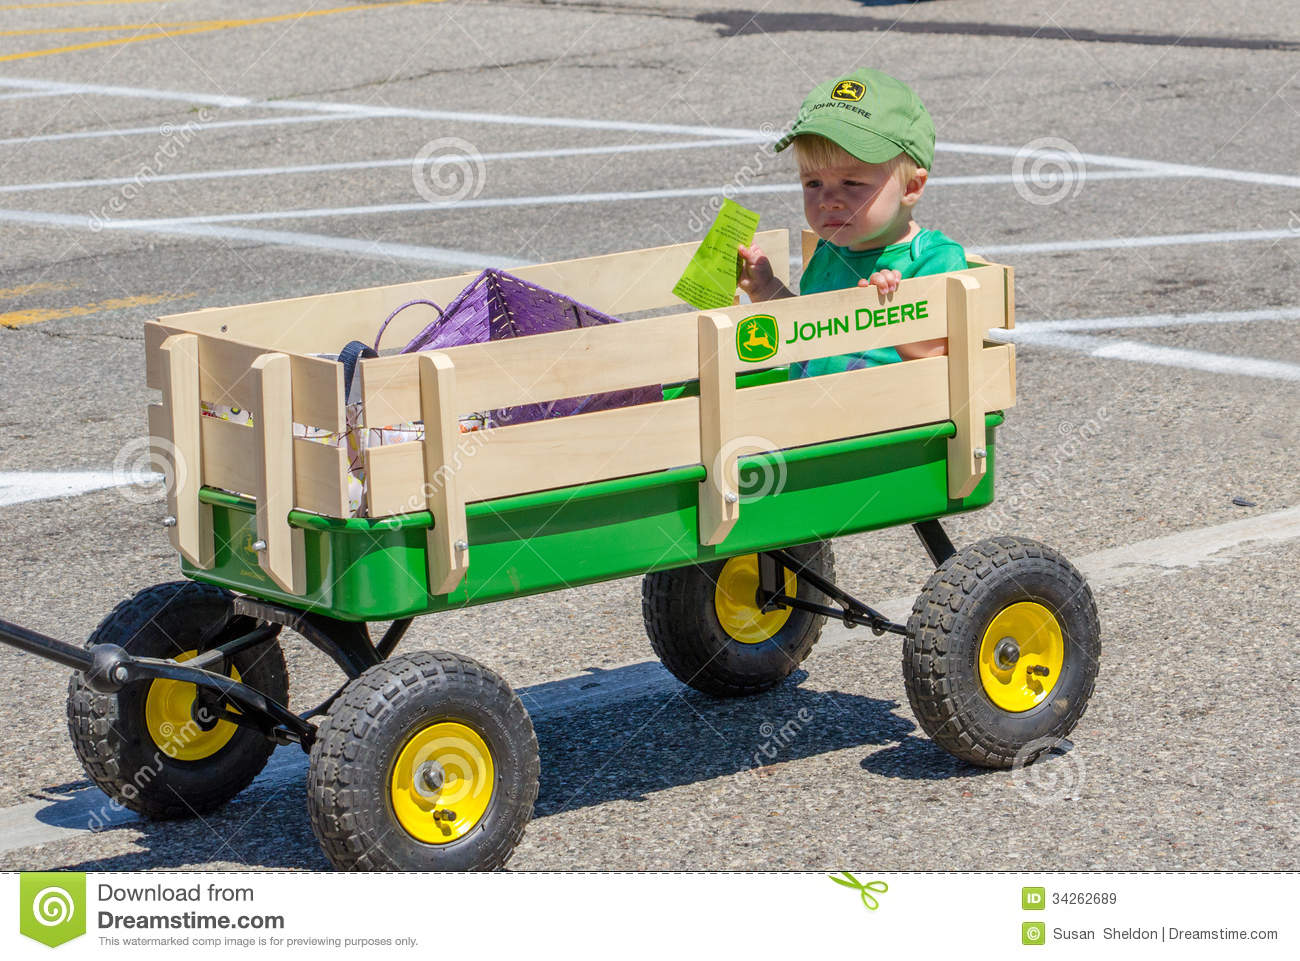 He Needed Is A John Deere Wagon Hat And Someone Strong To Pull Him